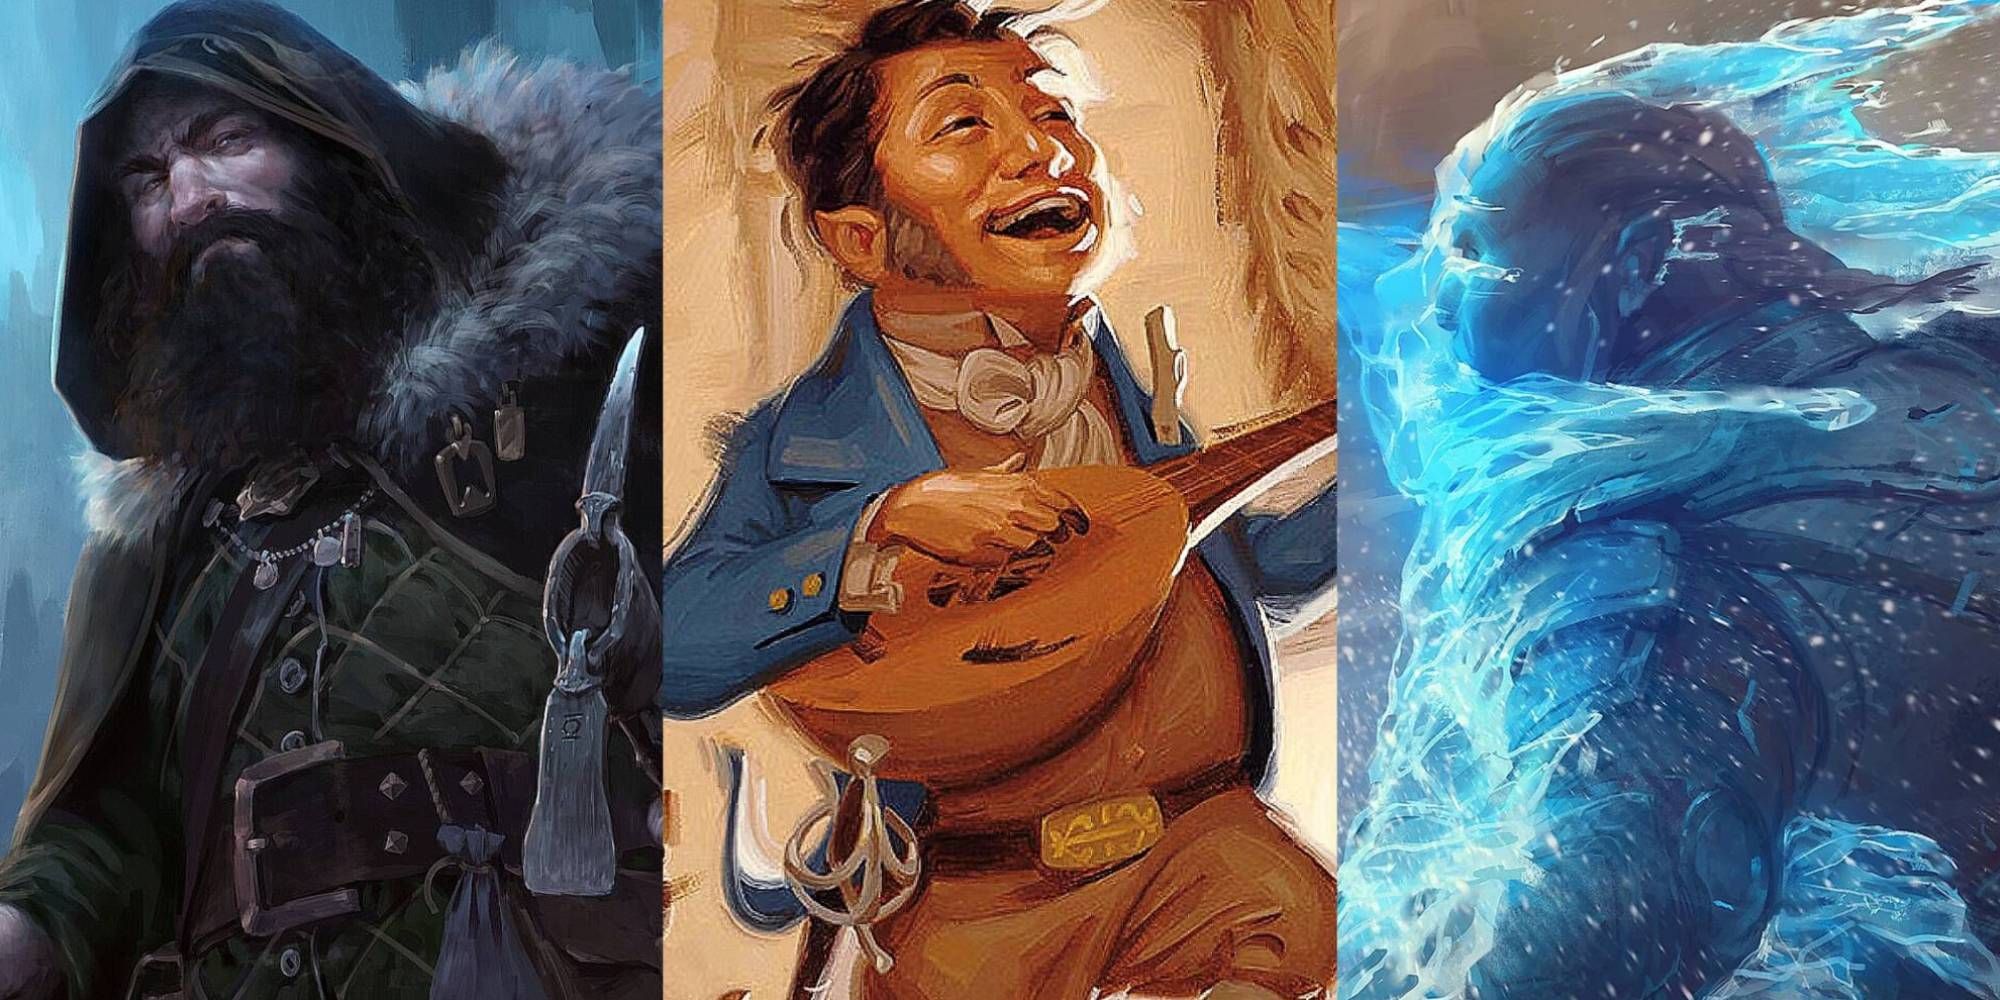 A collage of images including a Gloom Stalker, a singing Bard and frozen figure